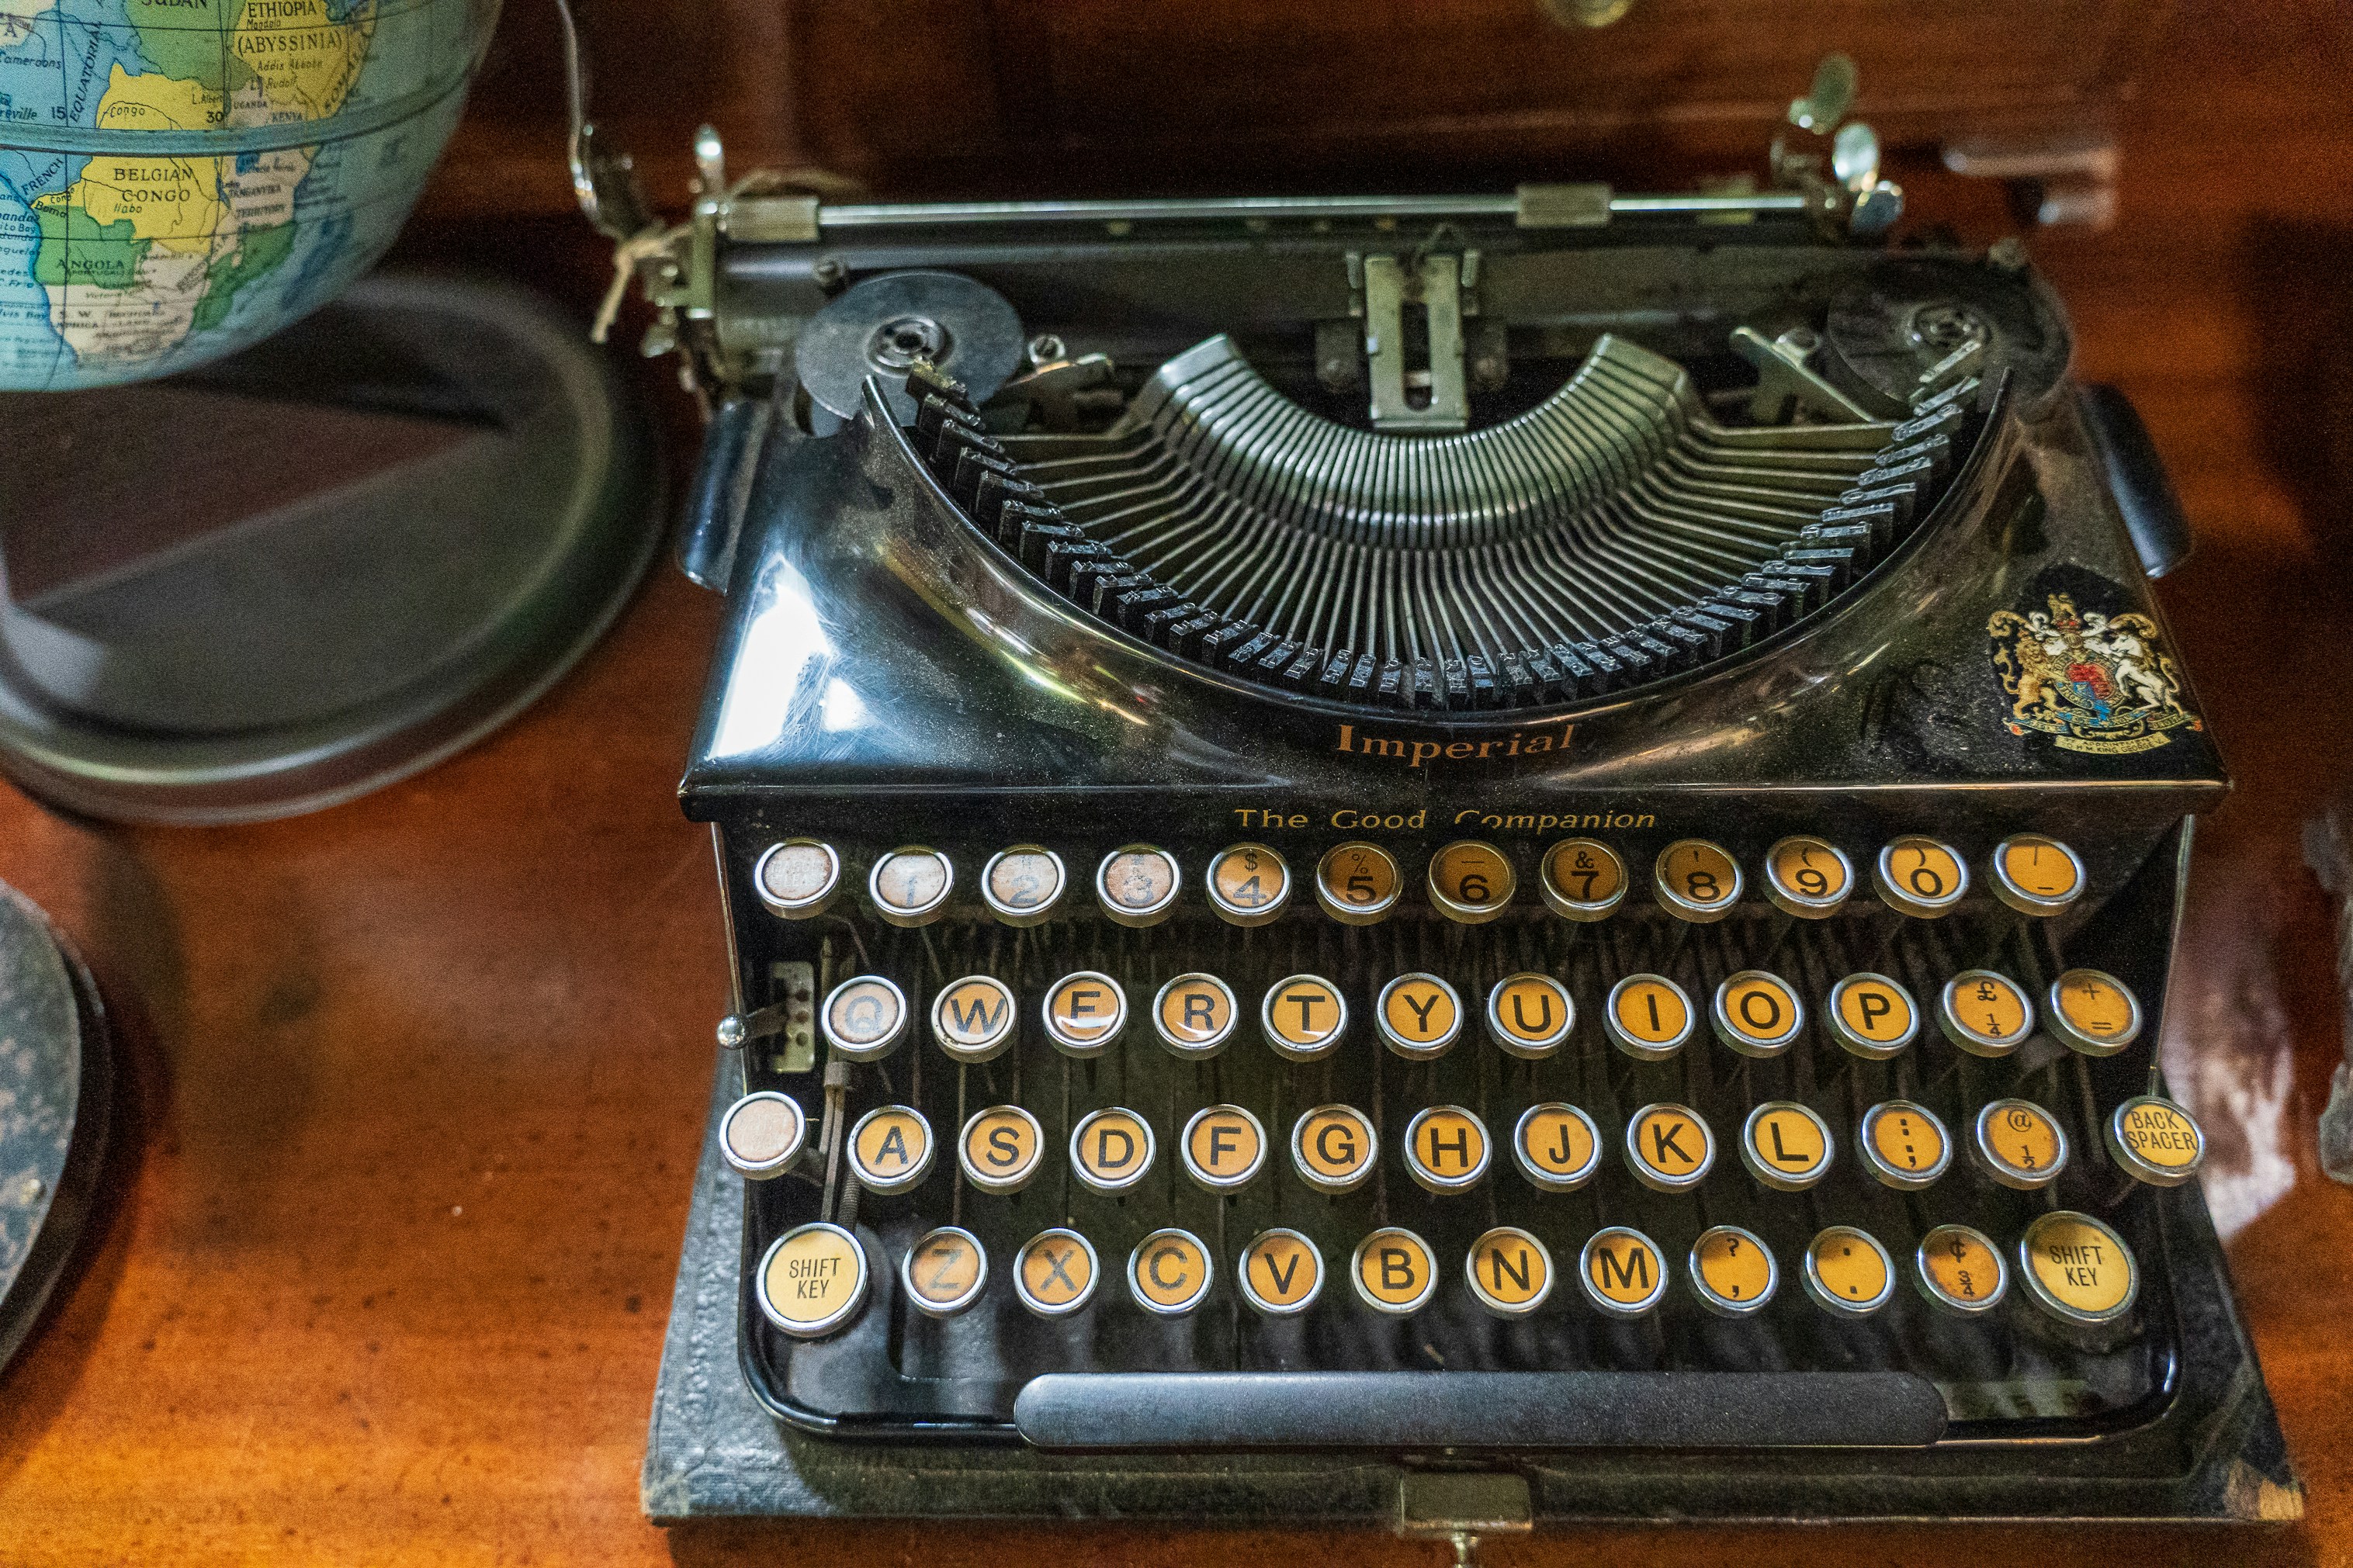 An Imperial typewriter that had a royal warranty, which means that the brand was used and approved of by the royal family.